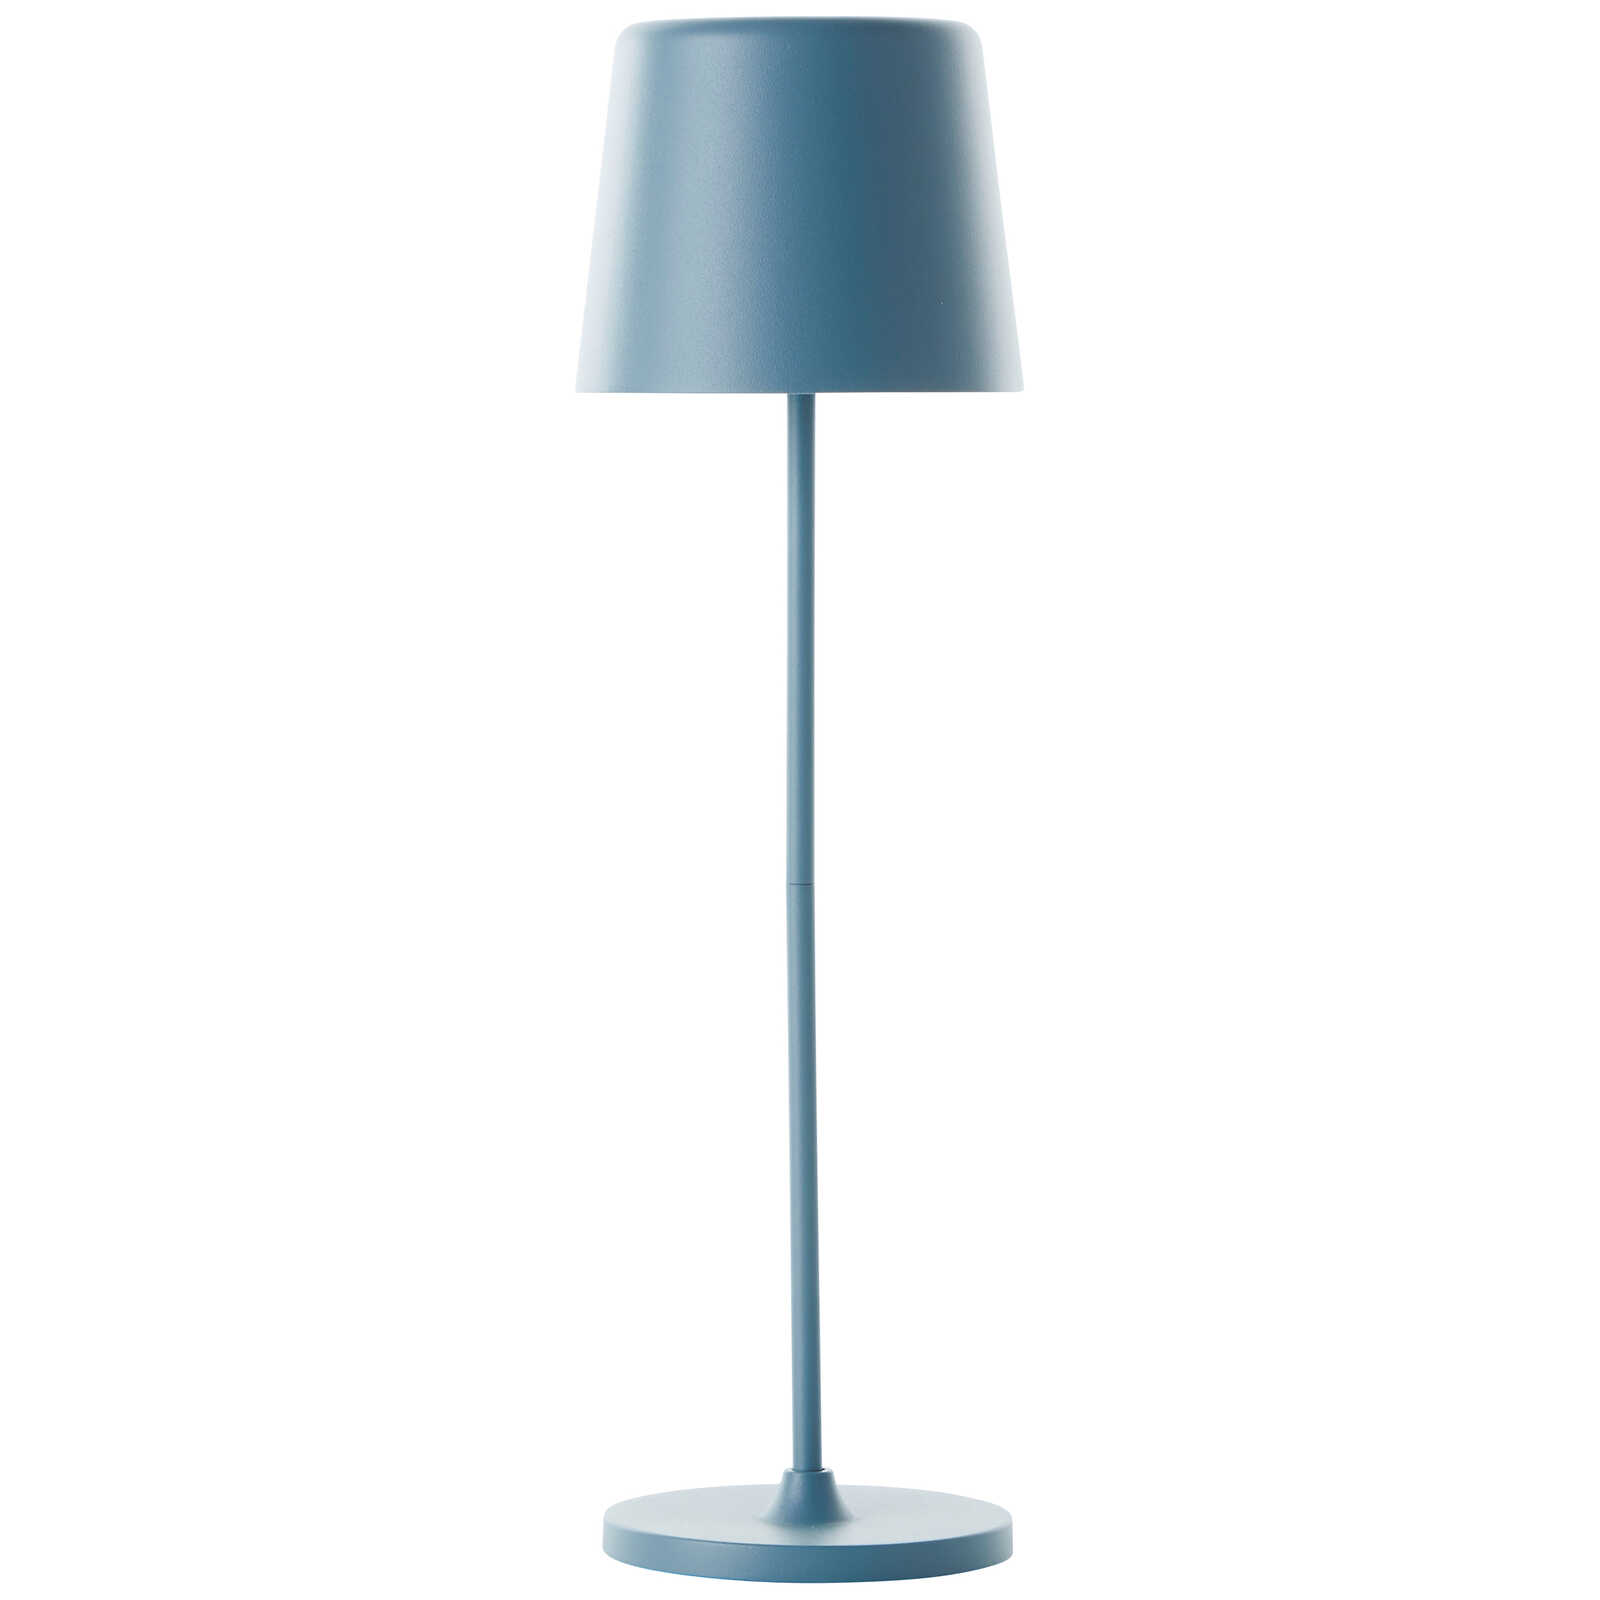             Metal table lamp - Cosy 1 - Blue
        